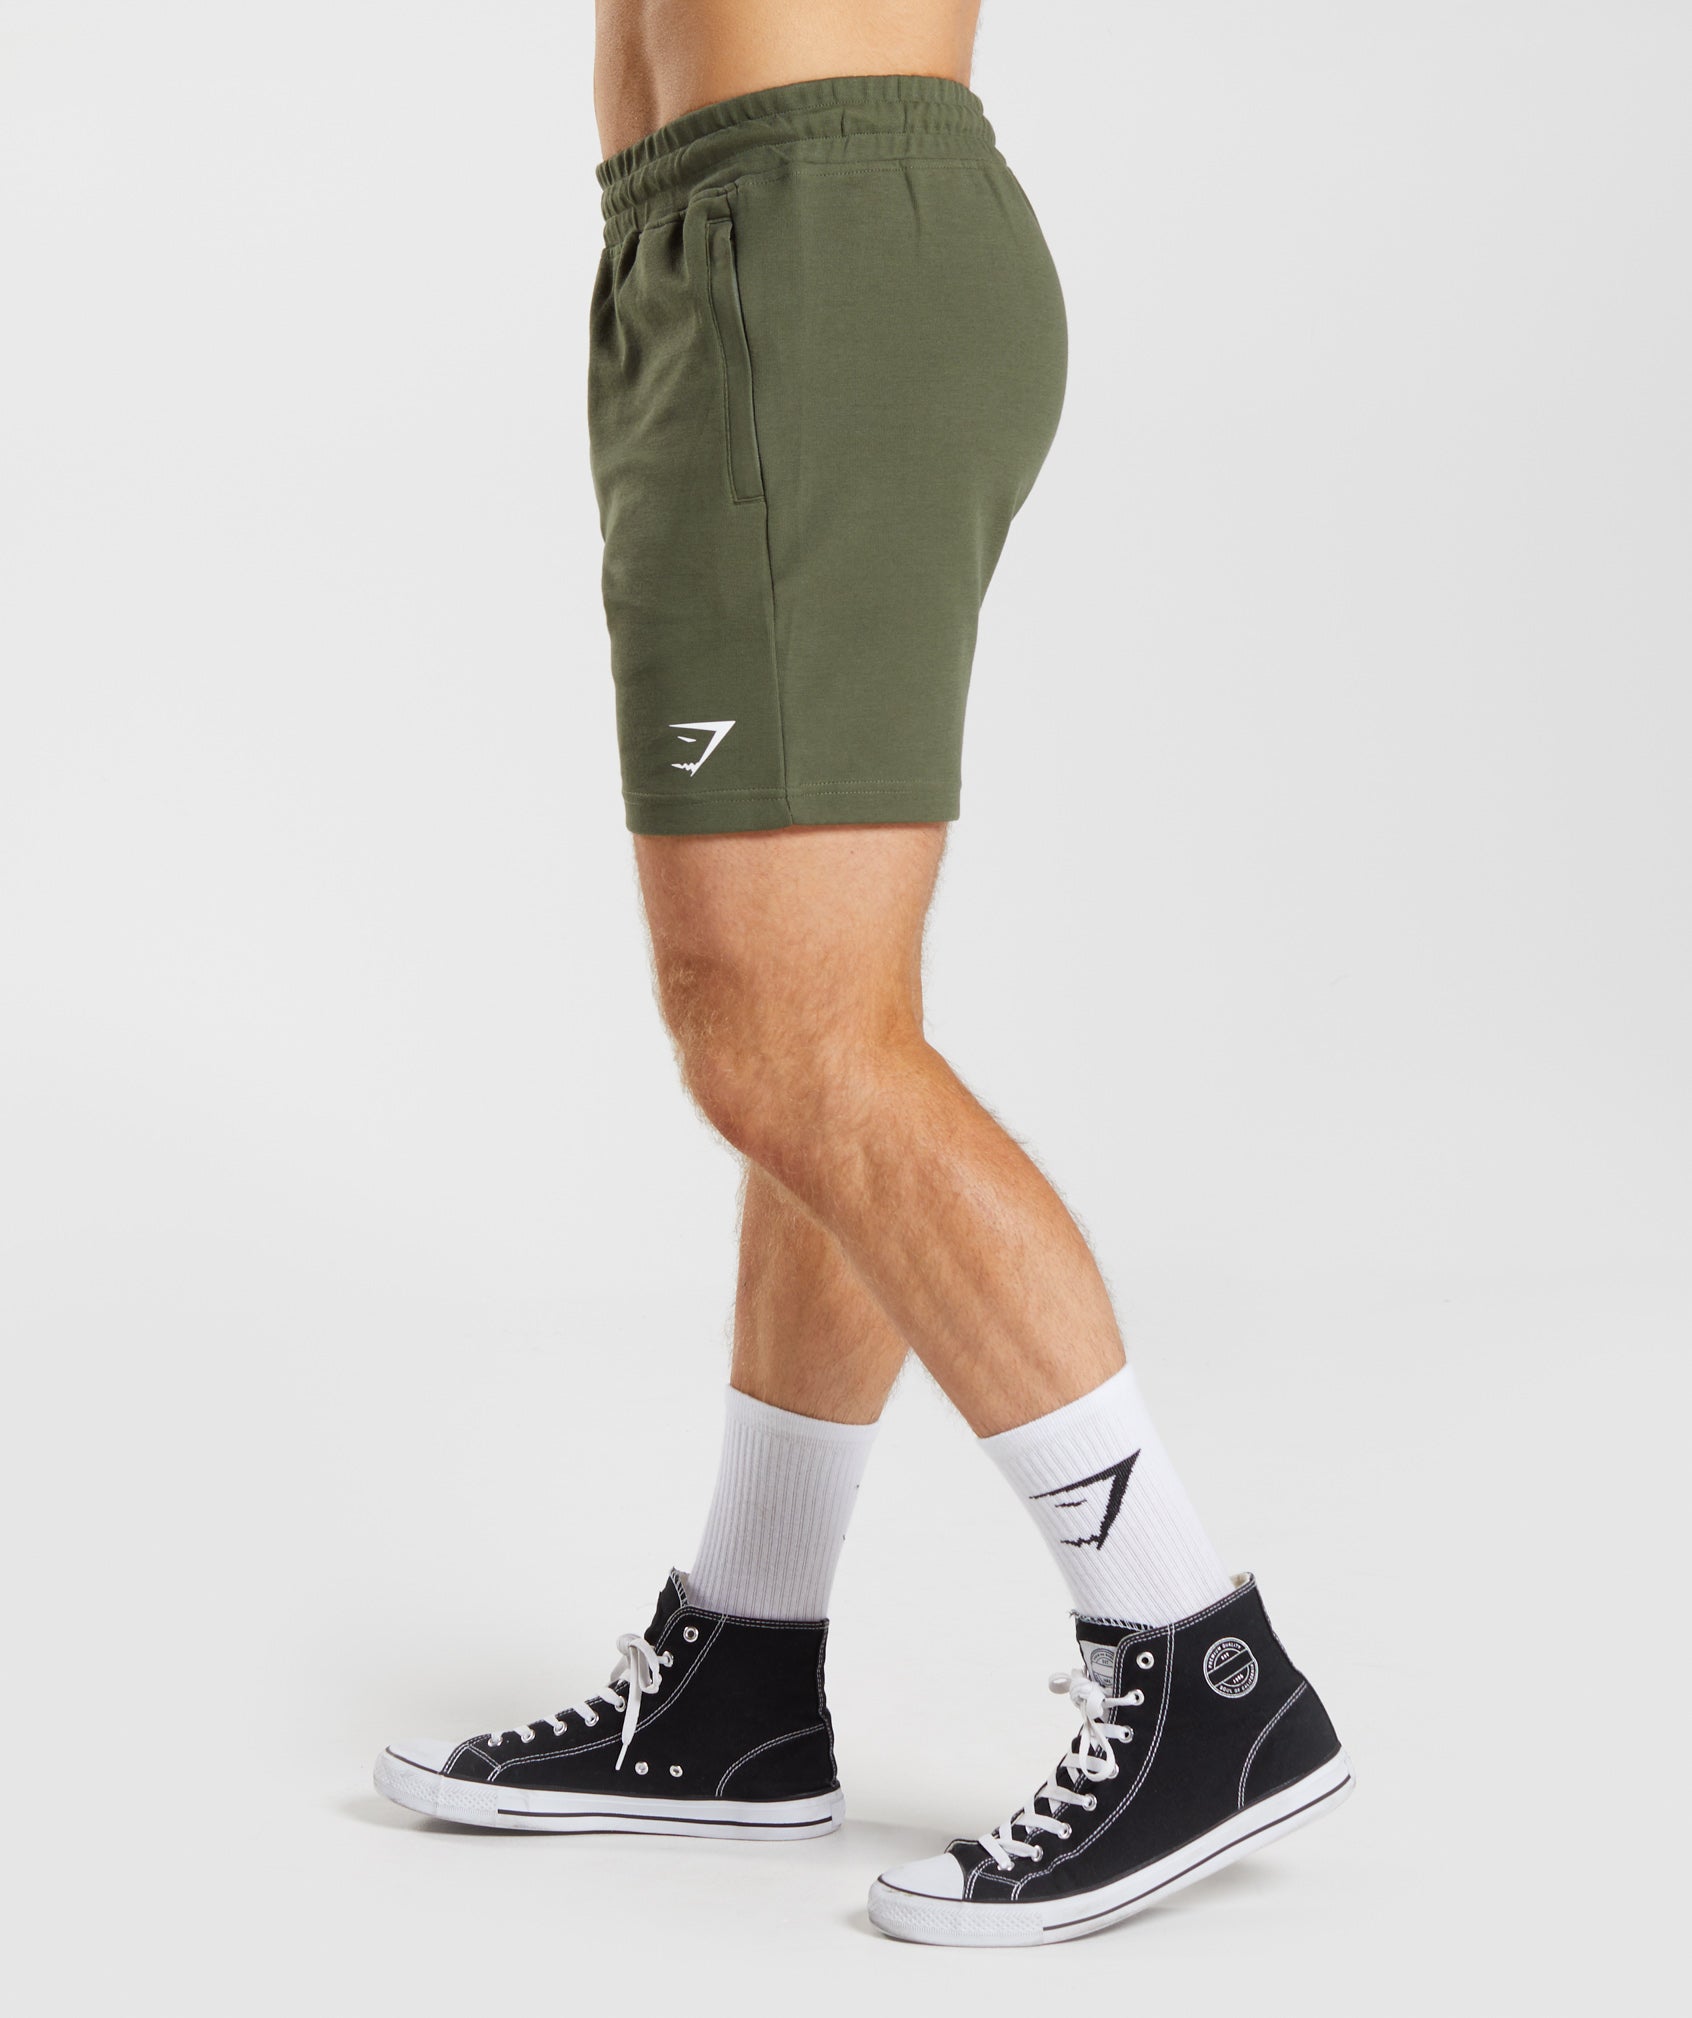 React 7" Shorts in Core Olive